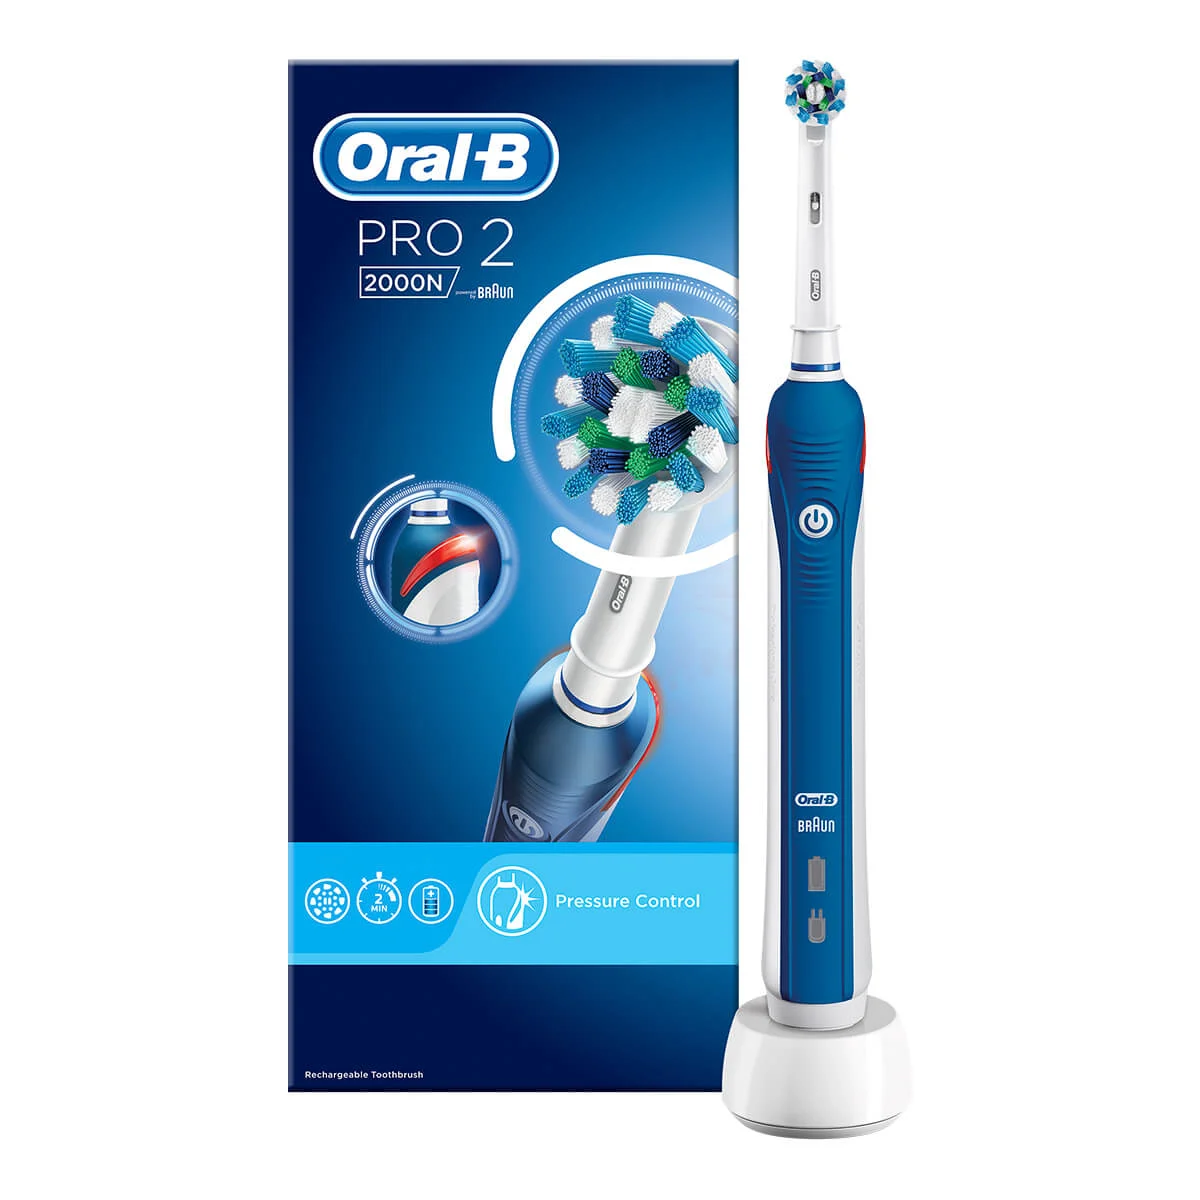 Oral-B Pro 2 2000N Electric Rechargeable Toothbrush 